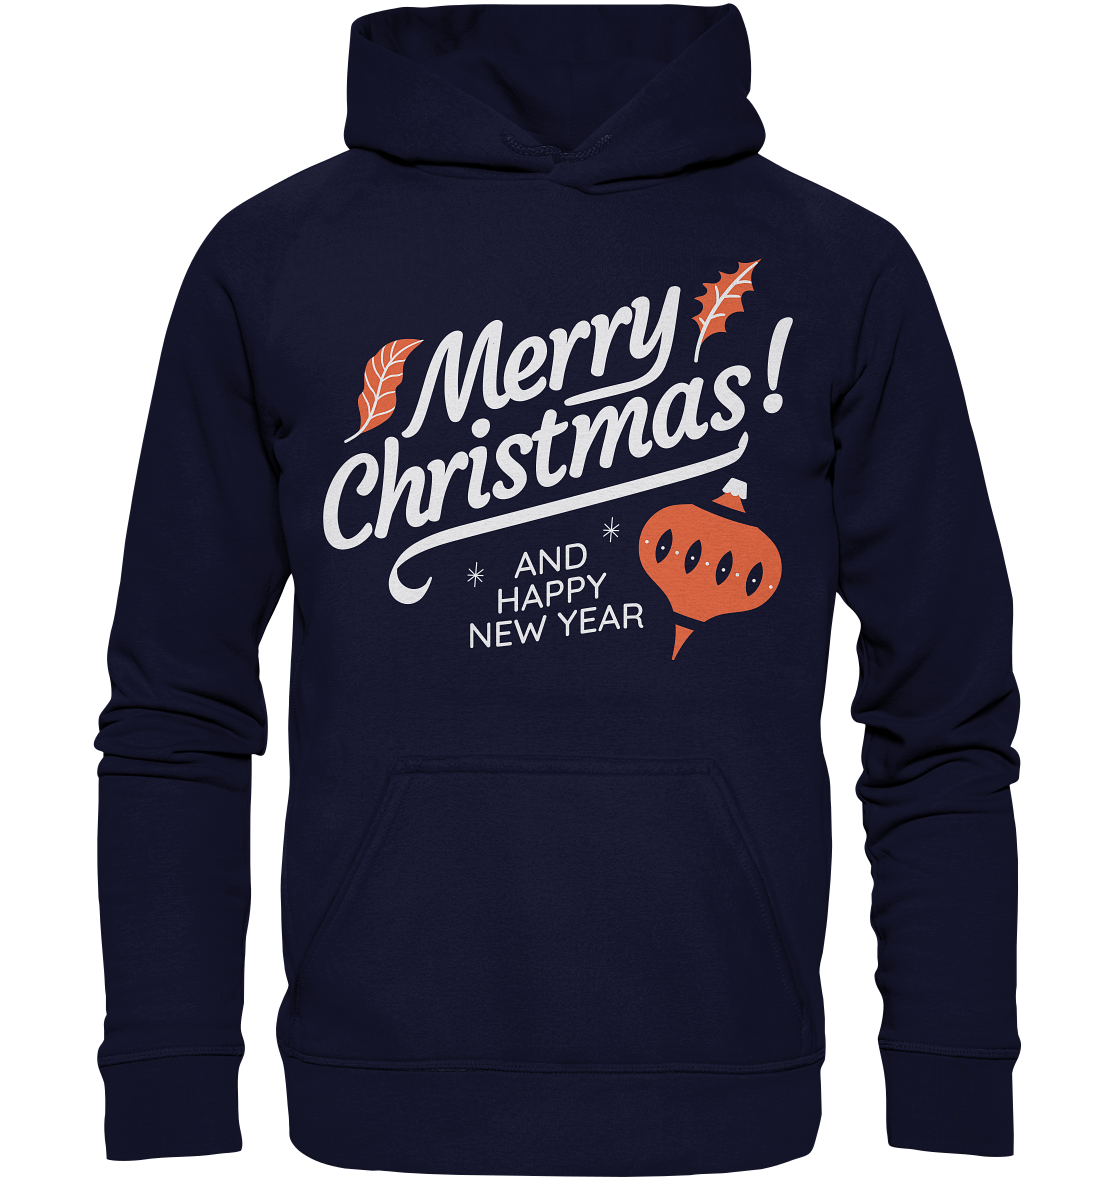 Merry Christmas and Happy New Year, Merry Christmas and Happy New Year - Basic Unisex Hoodie XL